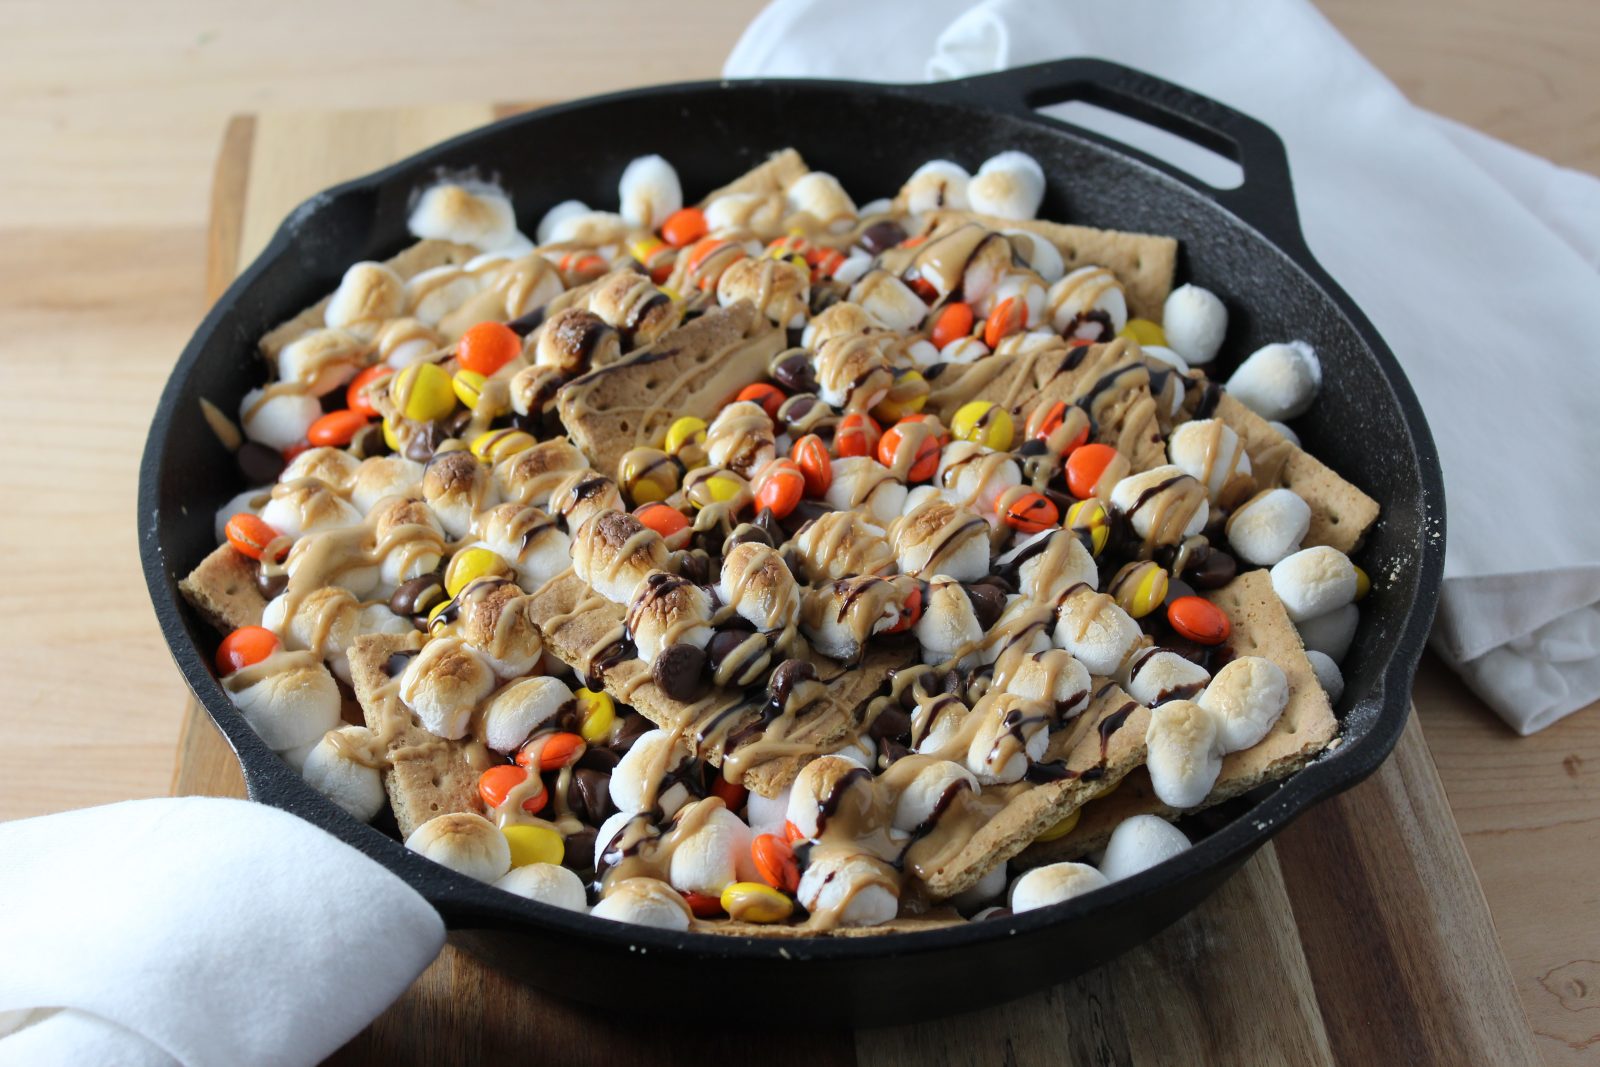 Peanut Butter Skillet S'mores Nachos - Baked and Drizzled with chocolate and peanut butter sauce